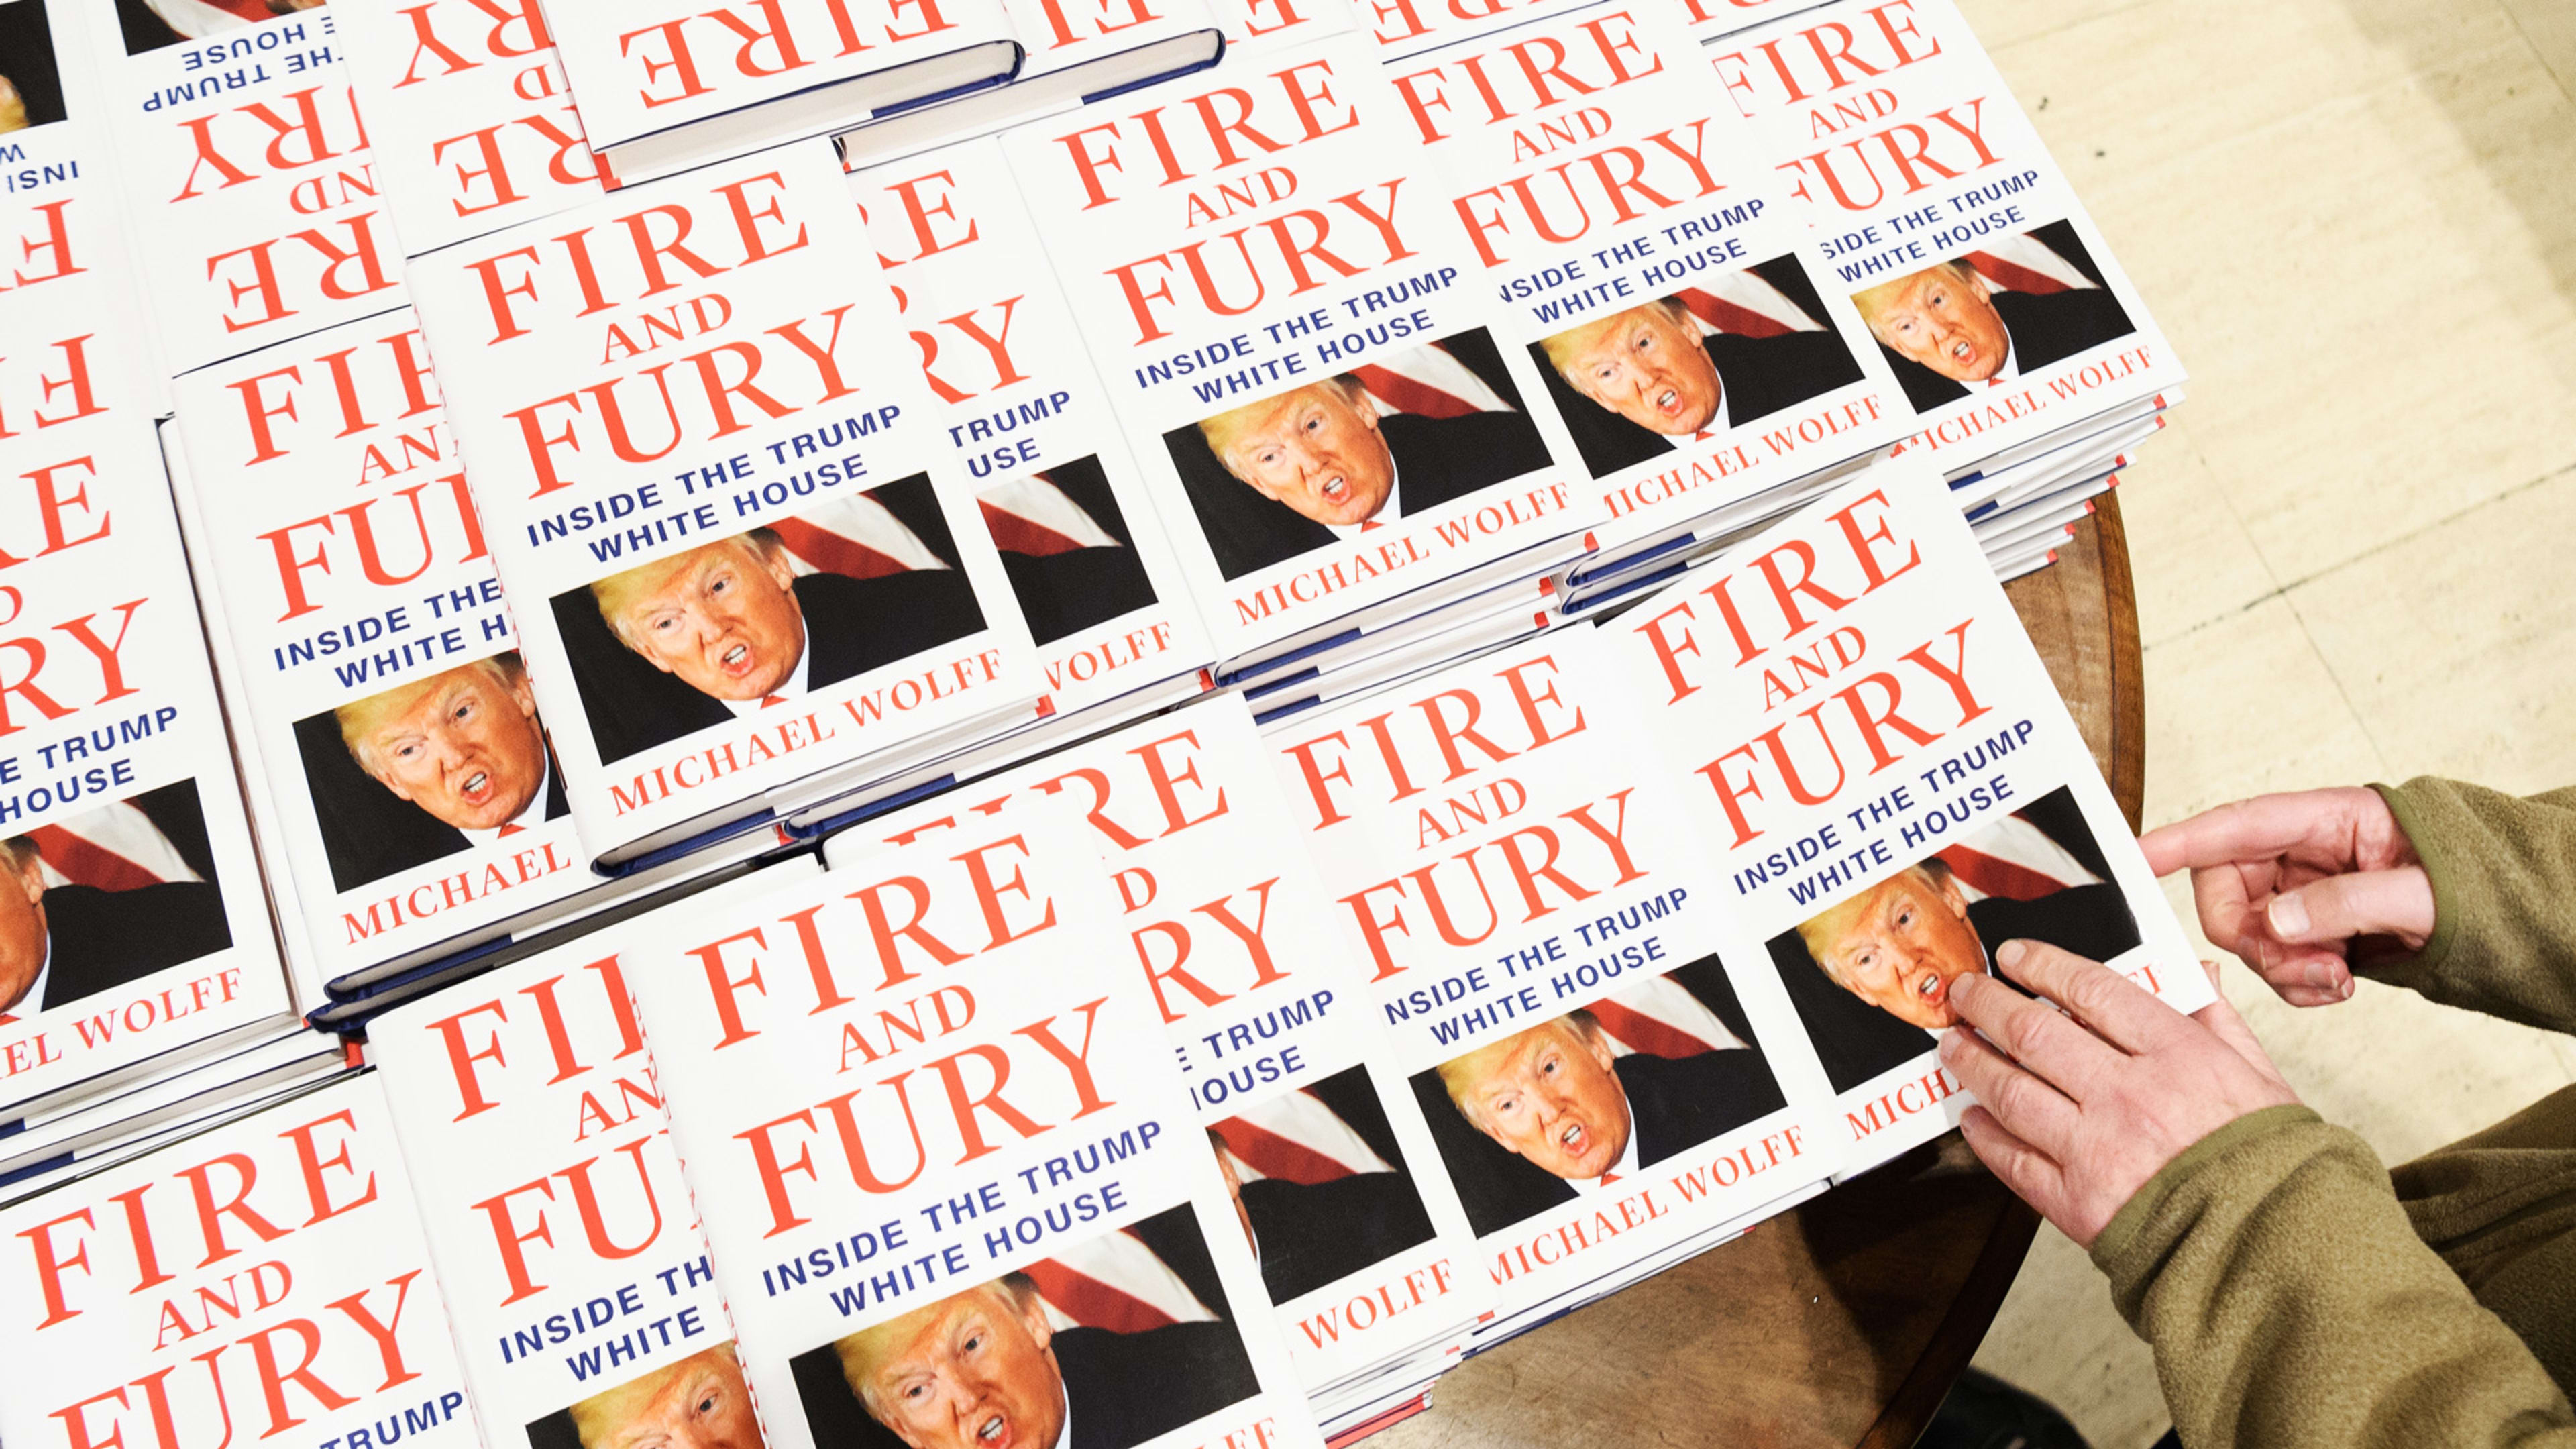 Book Publishing’s Weak Bet On “Fire And Fury”? Blame Data